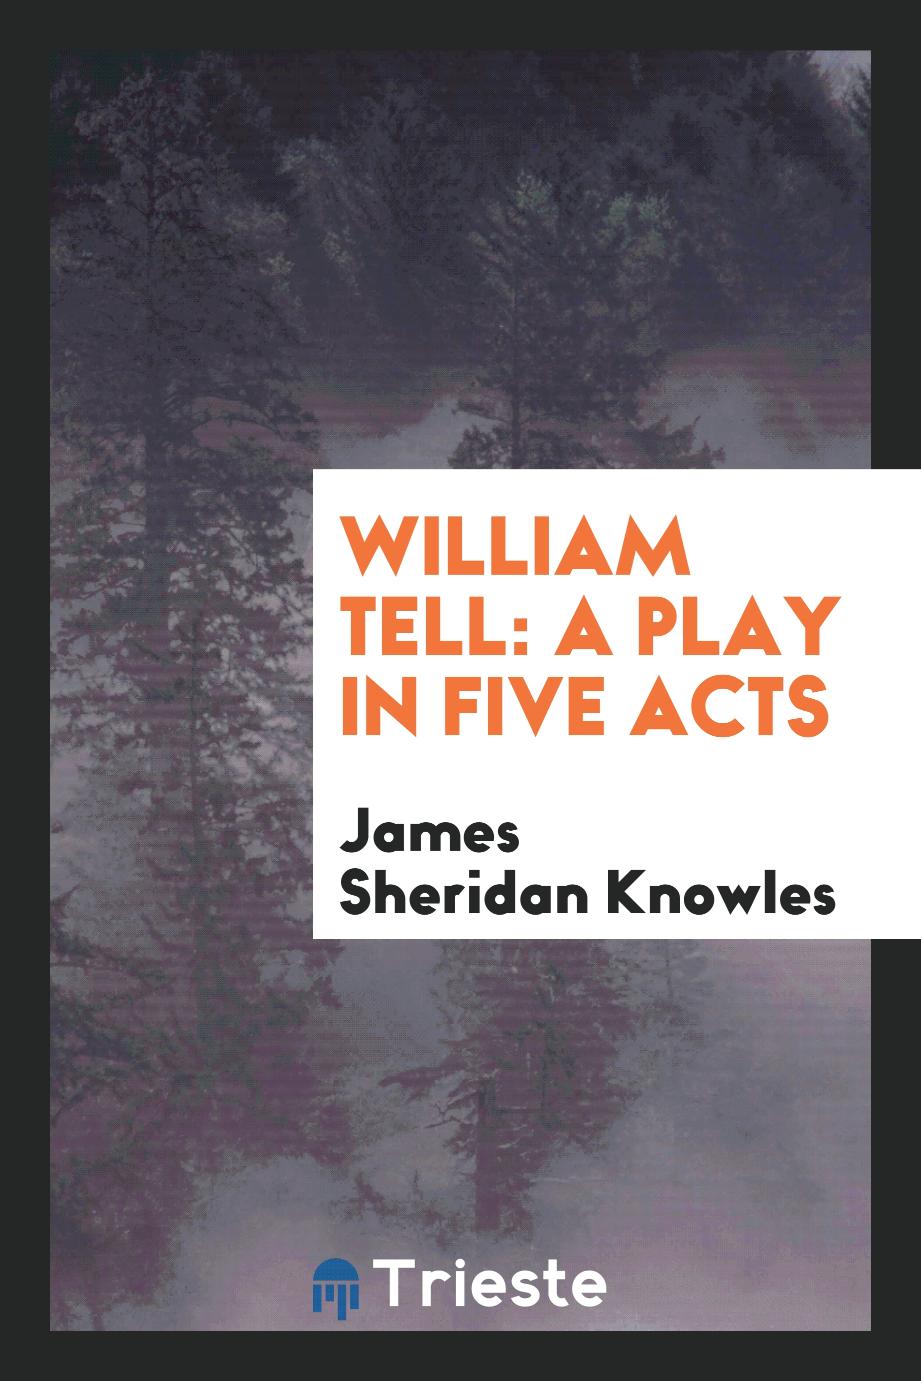 William Tell: a play in five acts